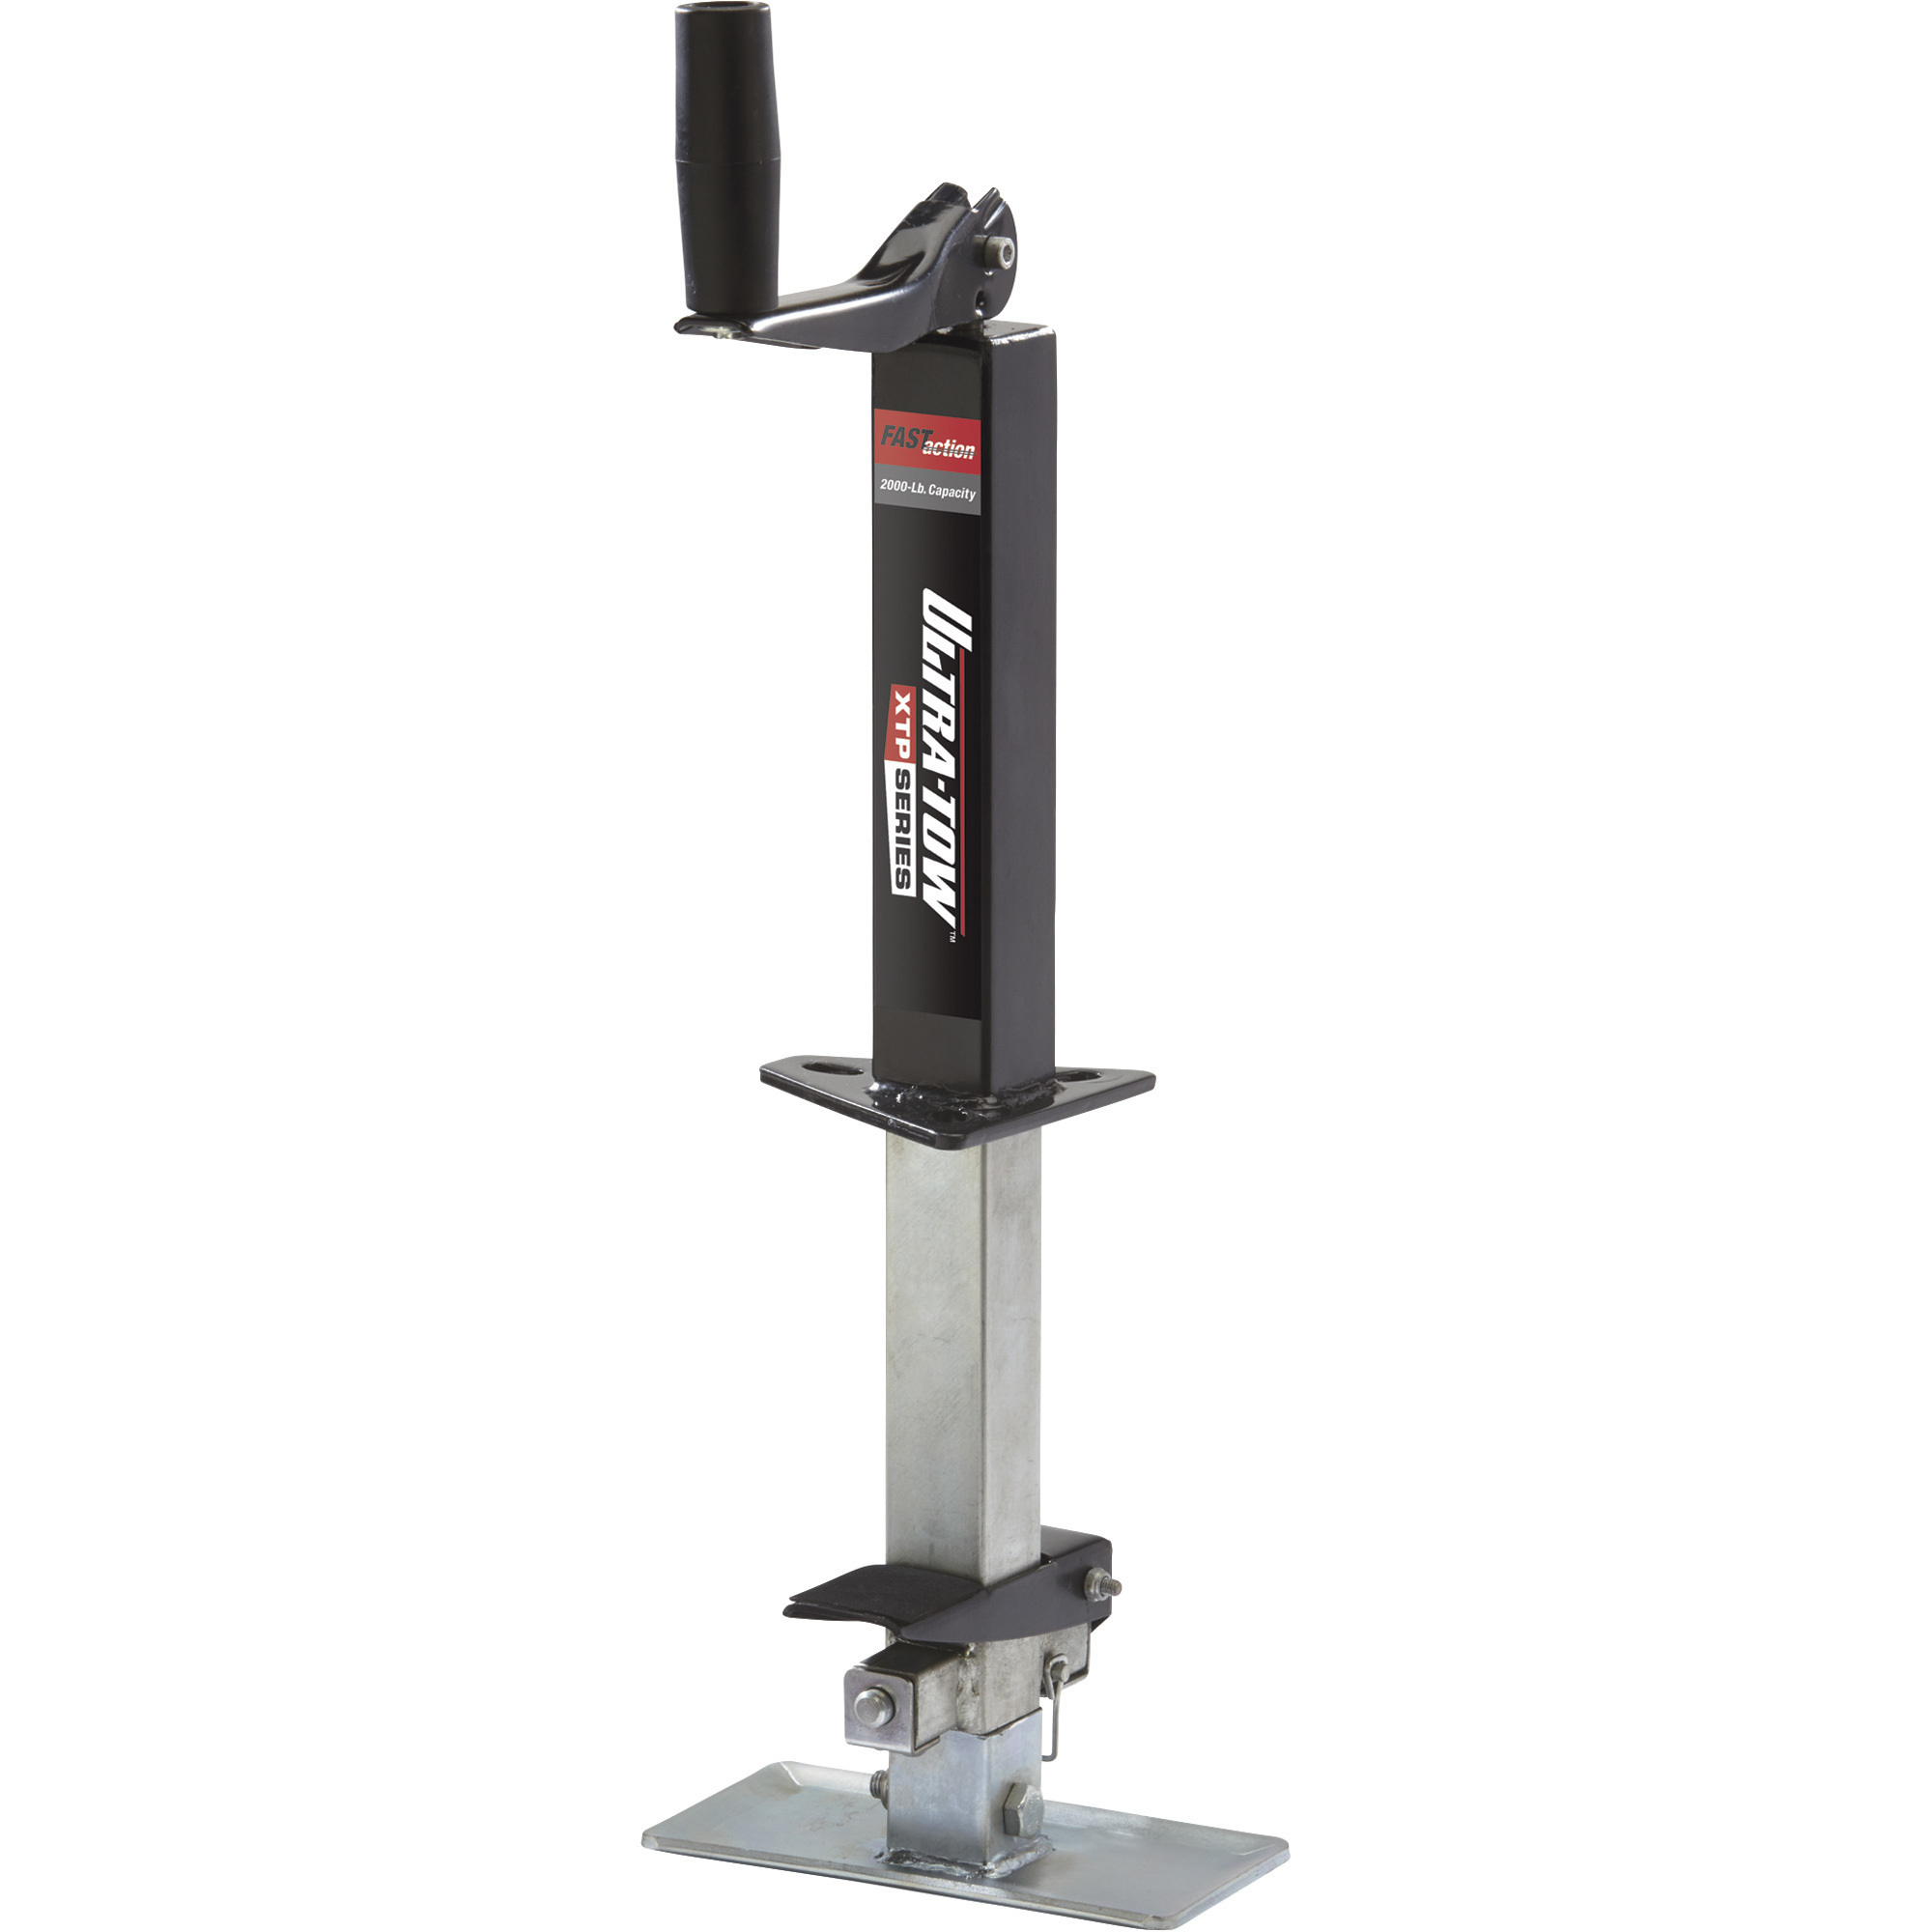 Ultra-Tow XTP Fast Action Square Tube Trailer Jack â 2000-Lb., Topwind, A-Frame Mount, Bolt-On